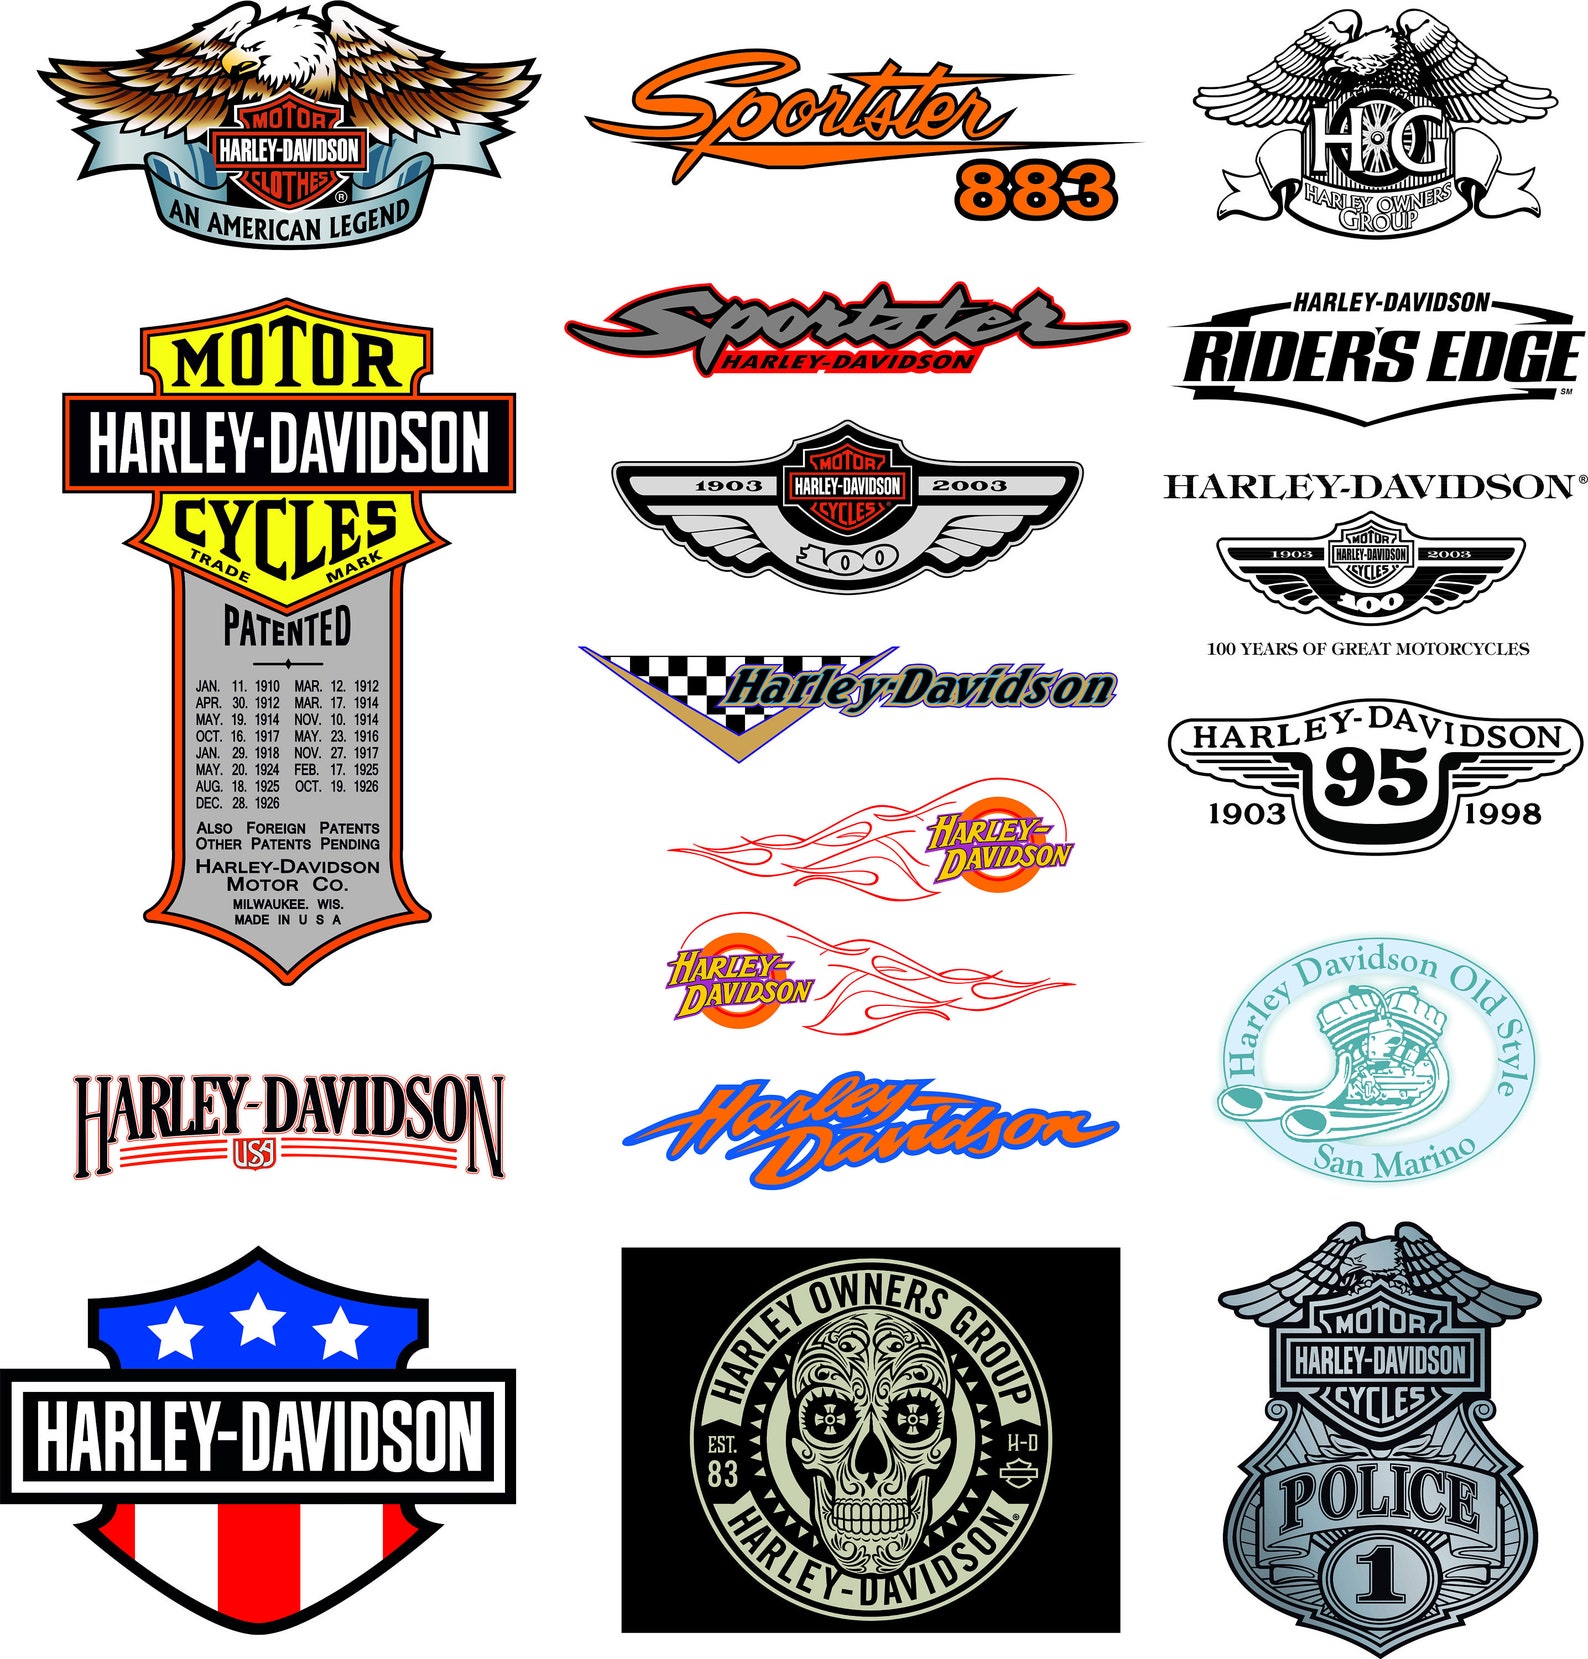 Cool SVG collection in retro style.